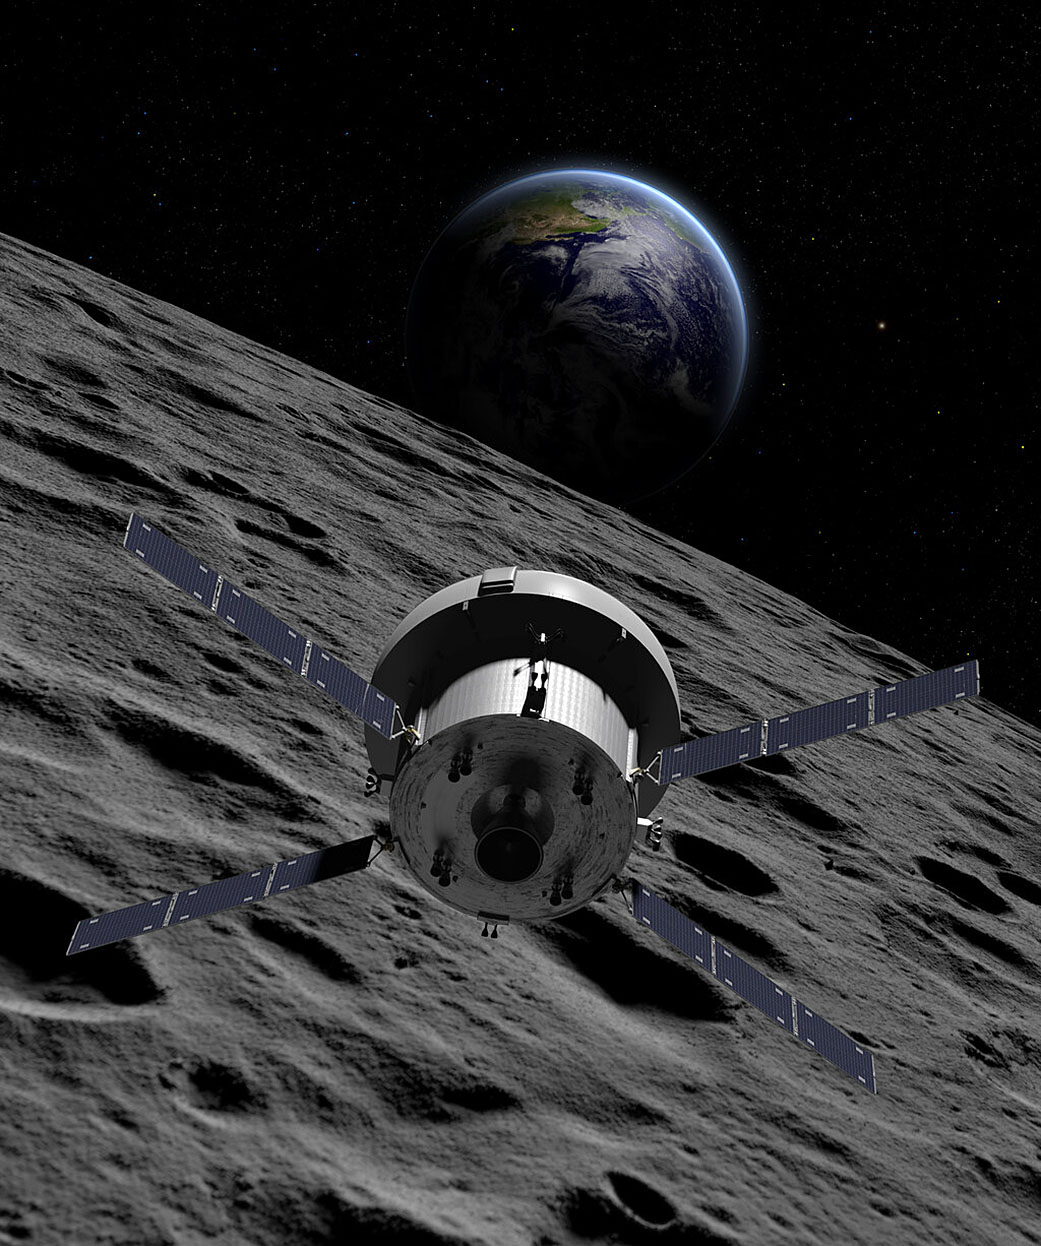 An illustration of the Orion spacecraft. Throughout this decade, NASA will explore more of the Moon than ever before and establish a sustainable human presence under Artemis in preparation for future human missions to Mars.